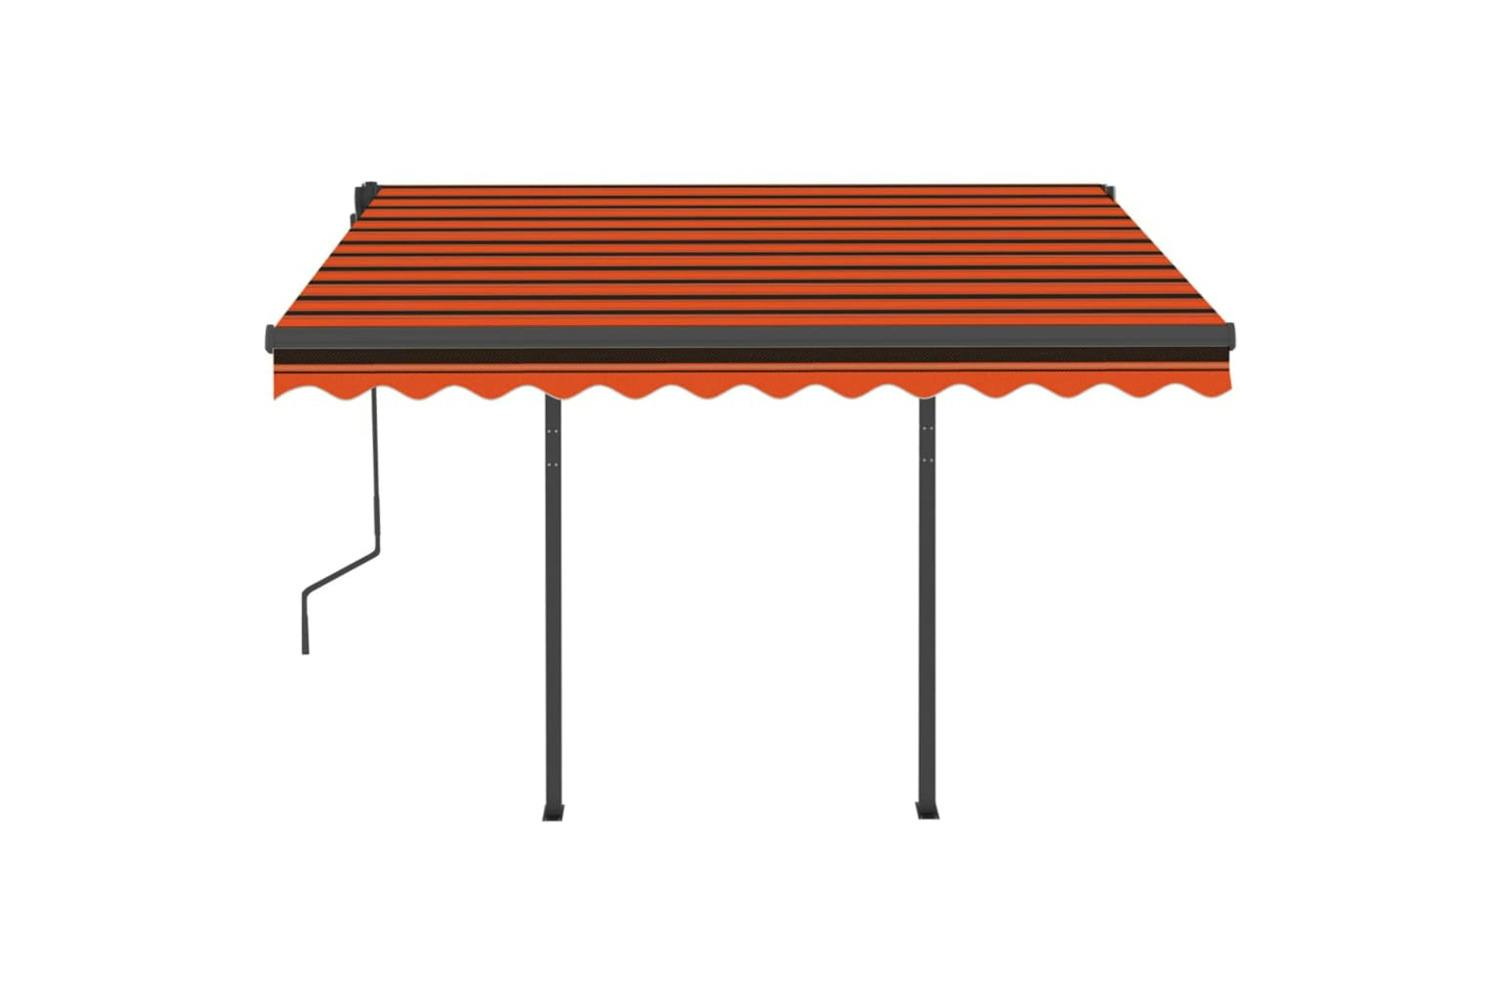 Vidaxl 3070125 Manual Retractable Awning With Led 3.5x2.5 M Orange And Brown